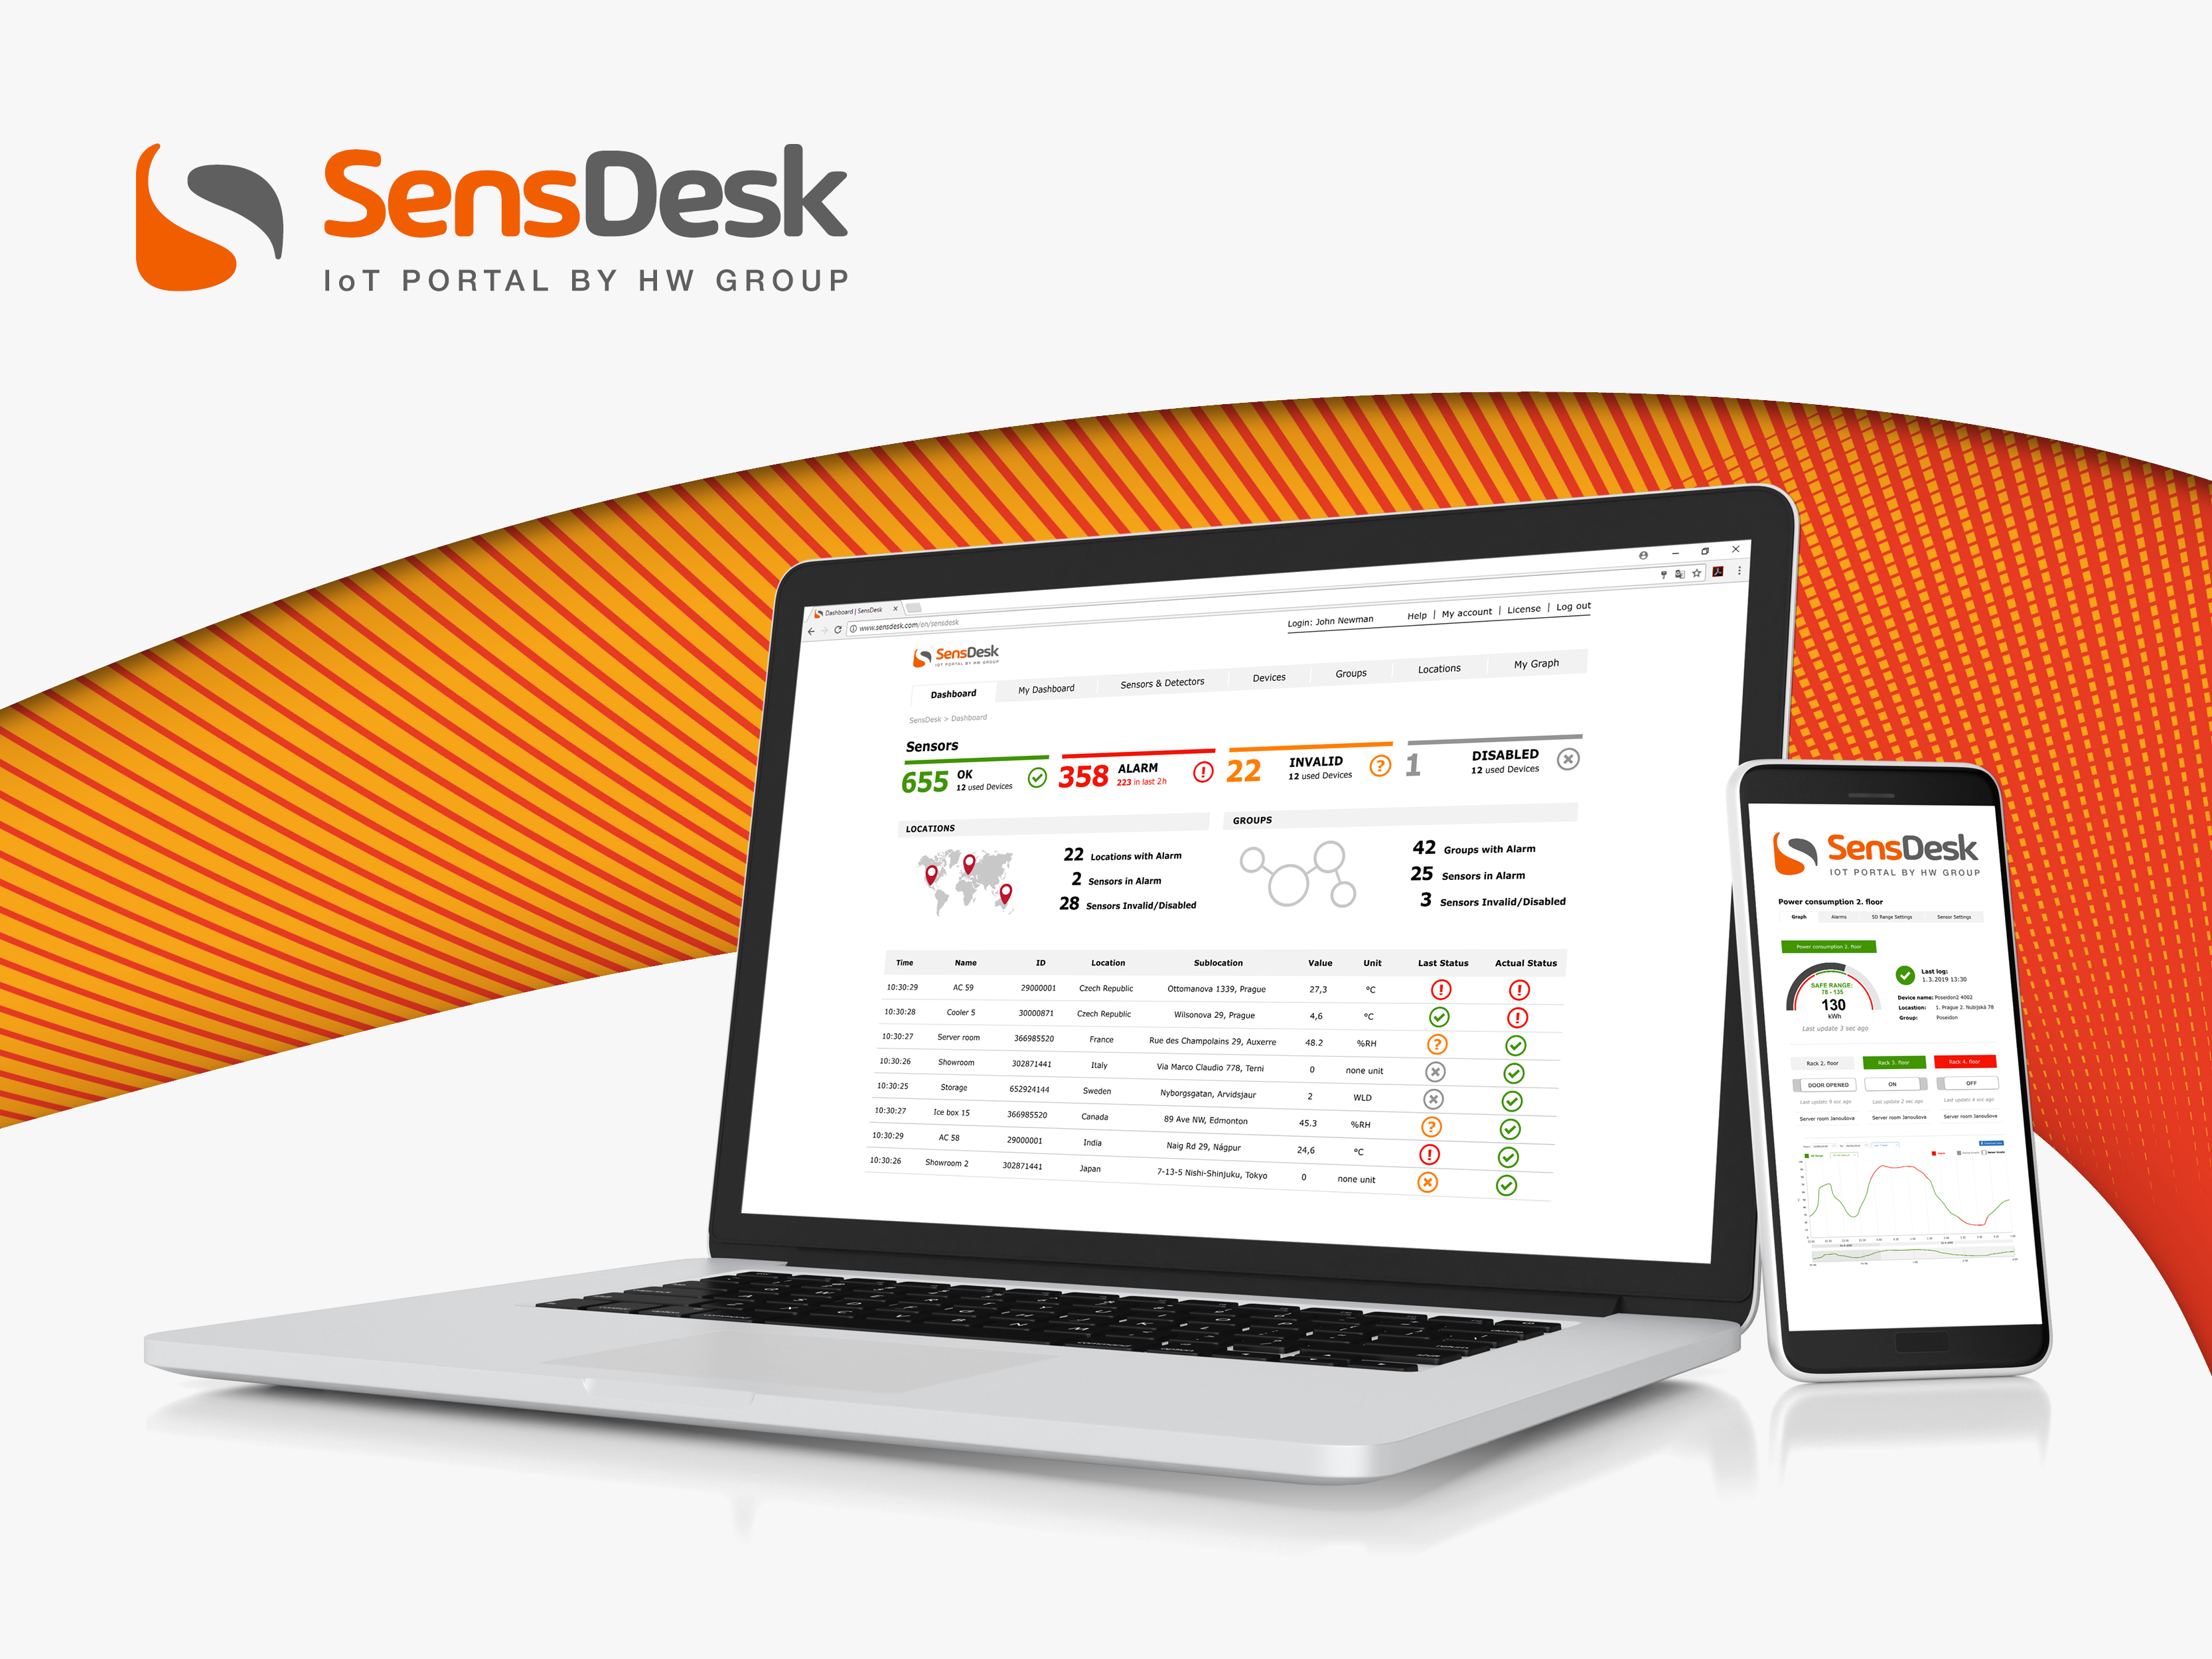 SensDesk: Monitoring and control portal for your IoT projects